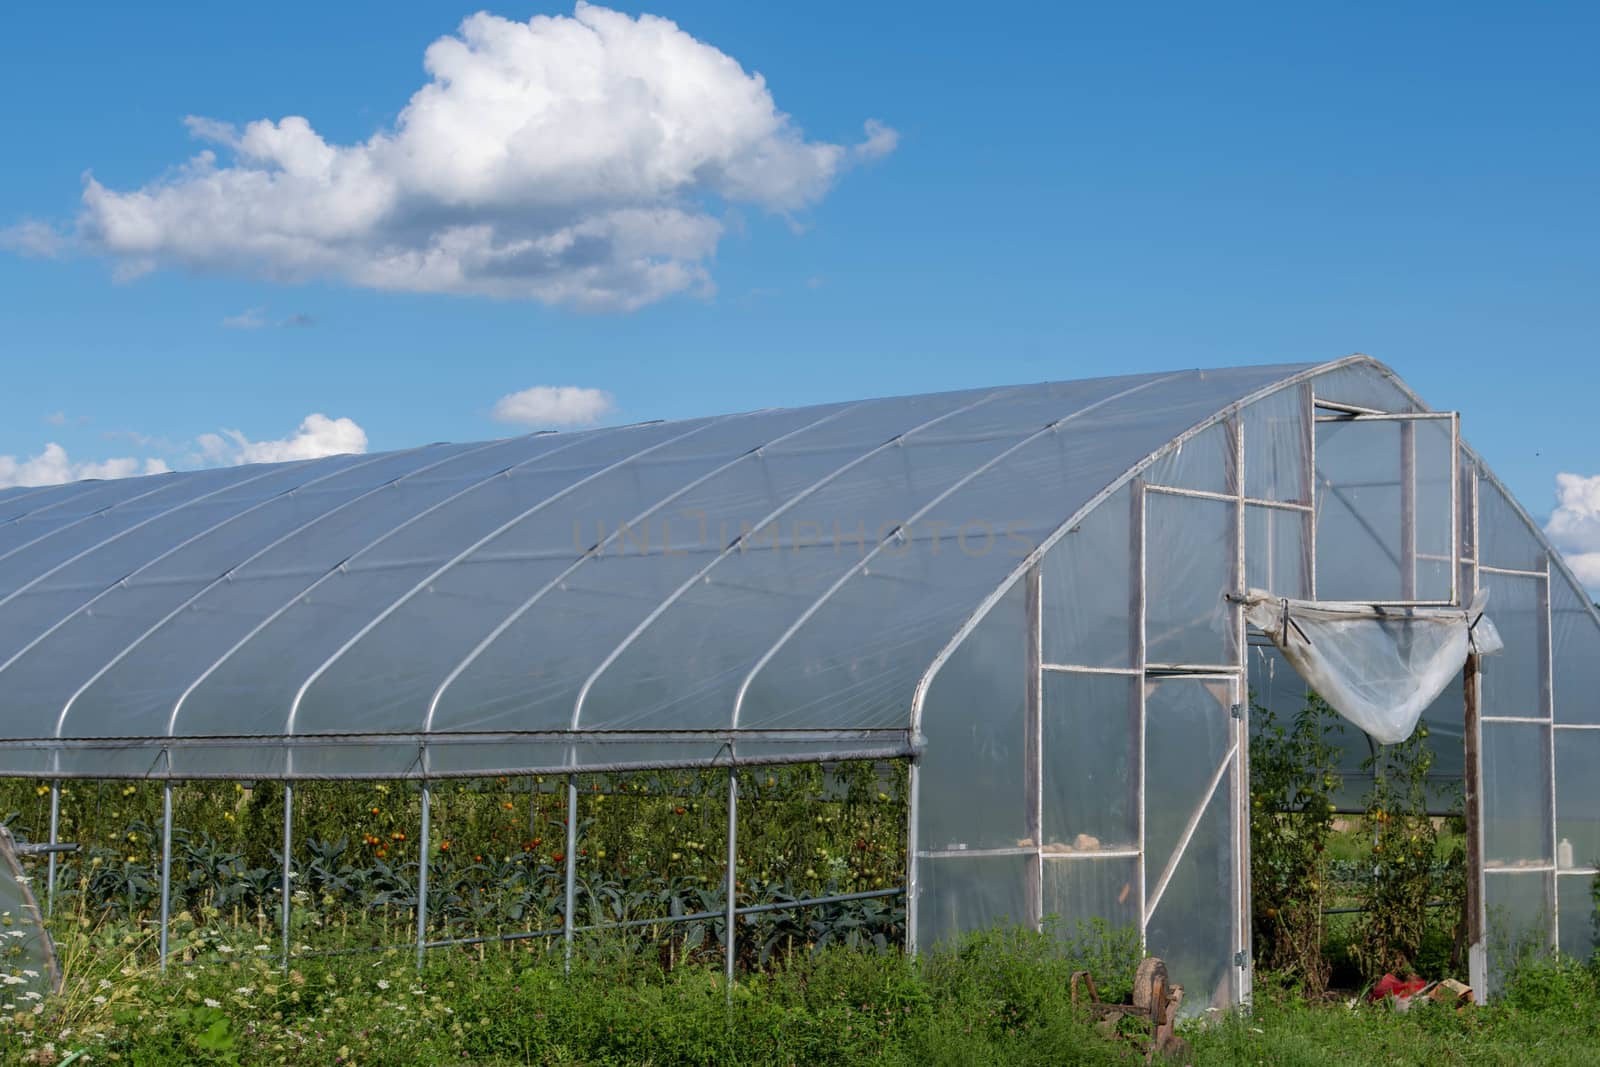 Side view of a greenhouse in a grassy field under a big blue sky with one cloud vegetables visible in interior.